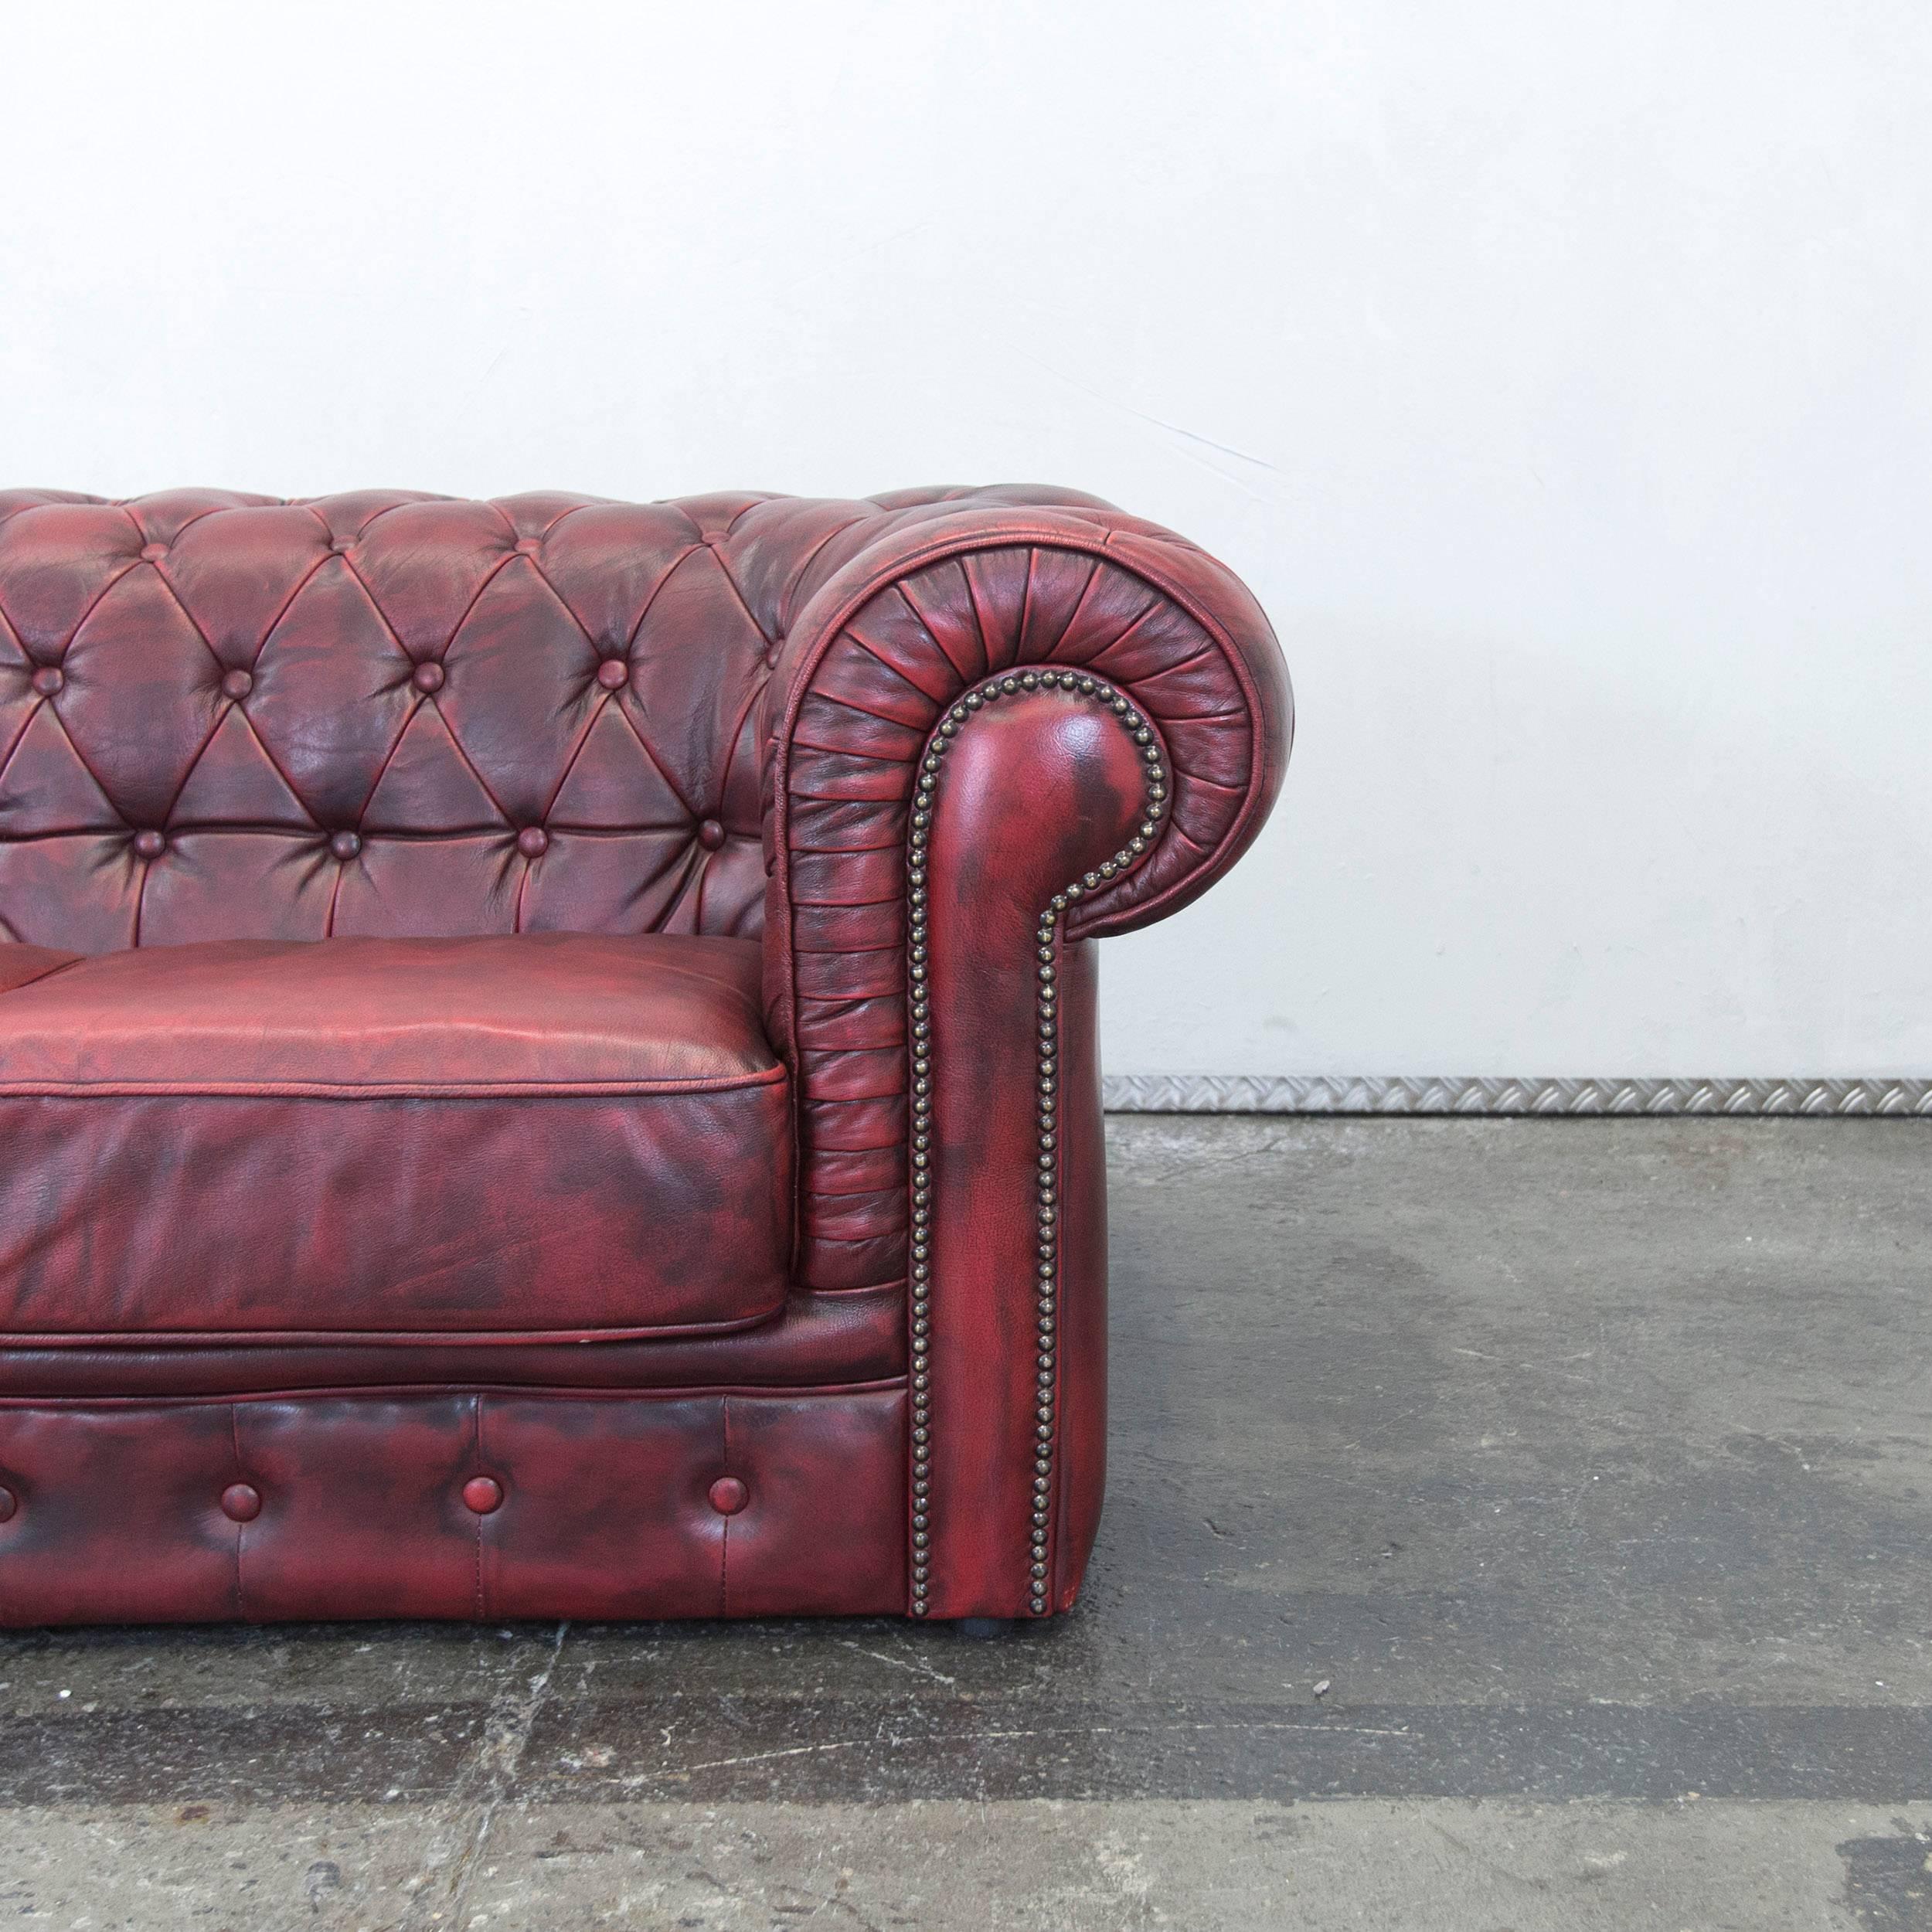 British Chesterfield Designer Leather Sofa Red Two-Seat Couch Vintage Retro